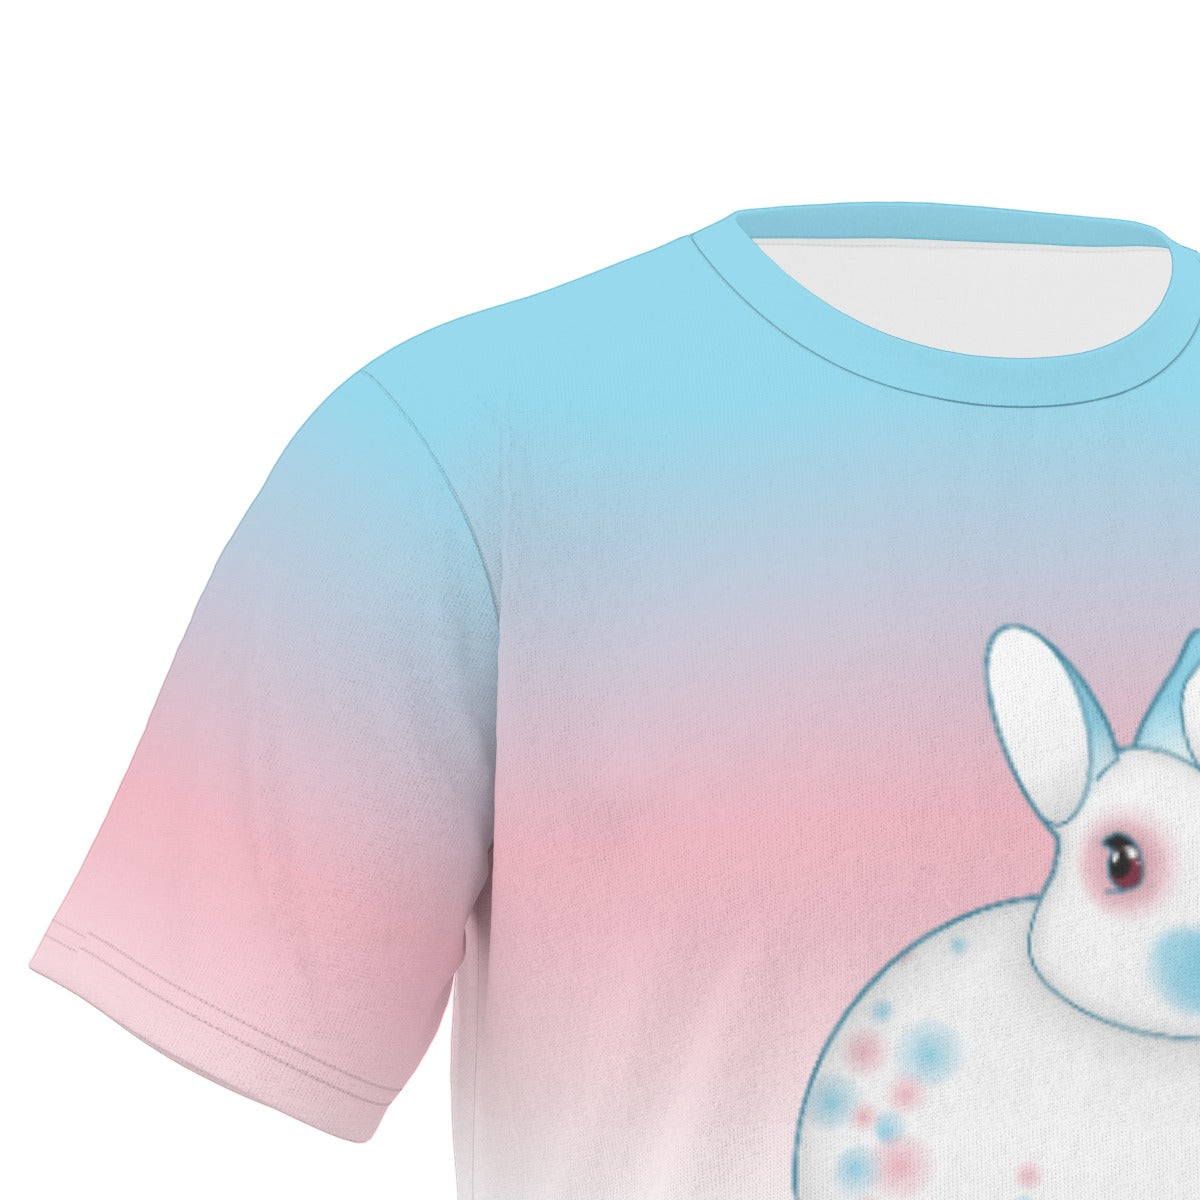 Transgender Spotted Bunny with Gradient Background Relaxed Fit O-Neck T-Shirt